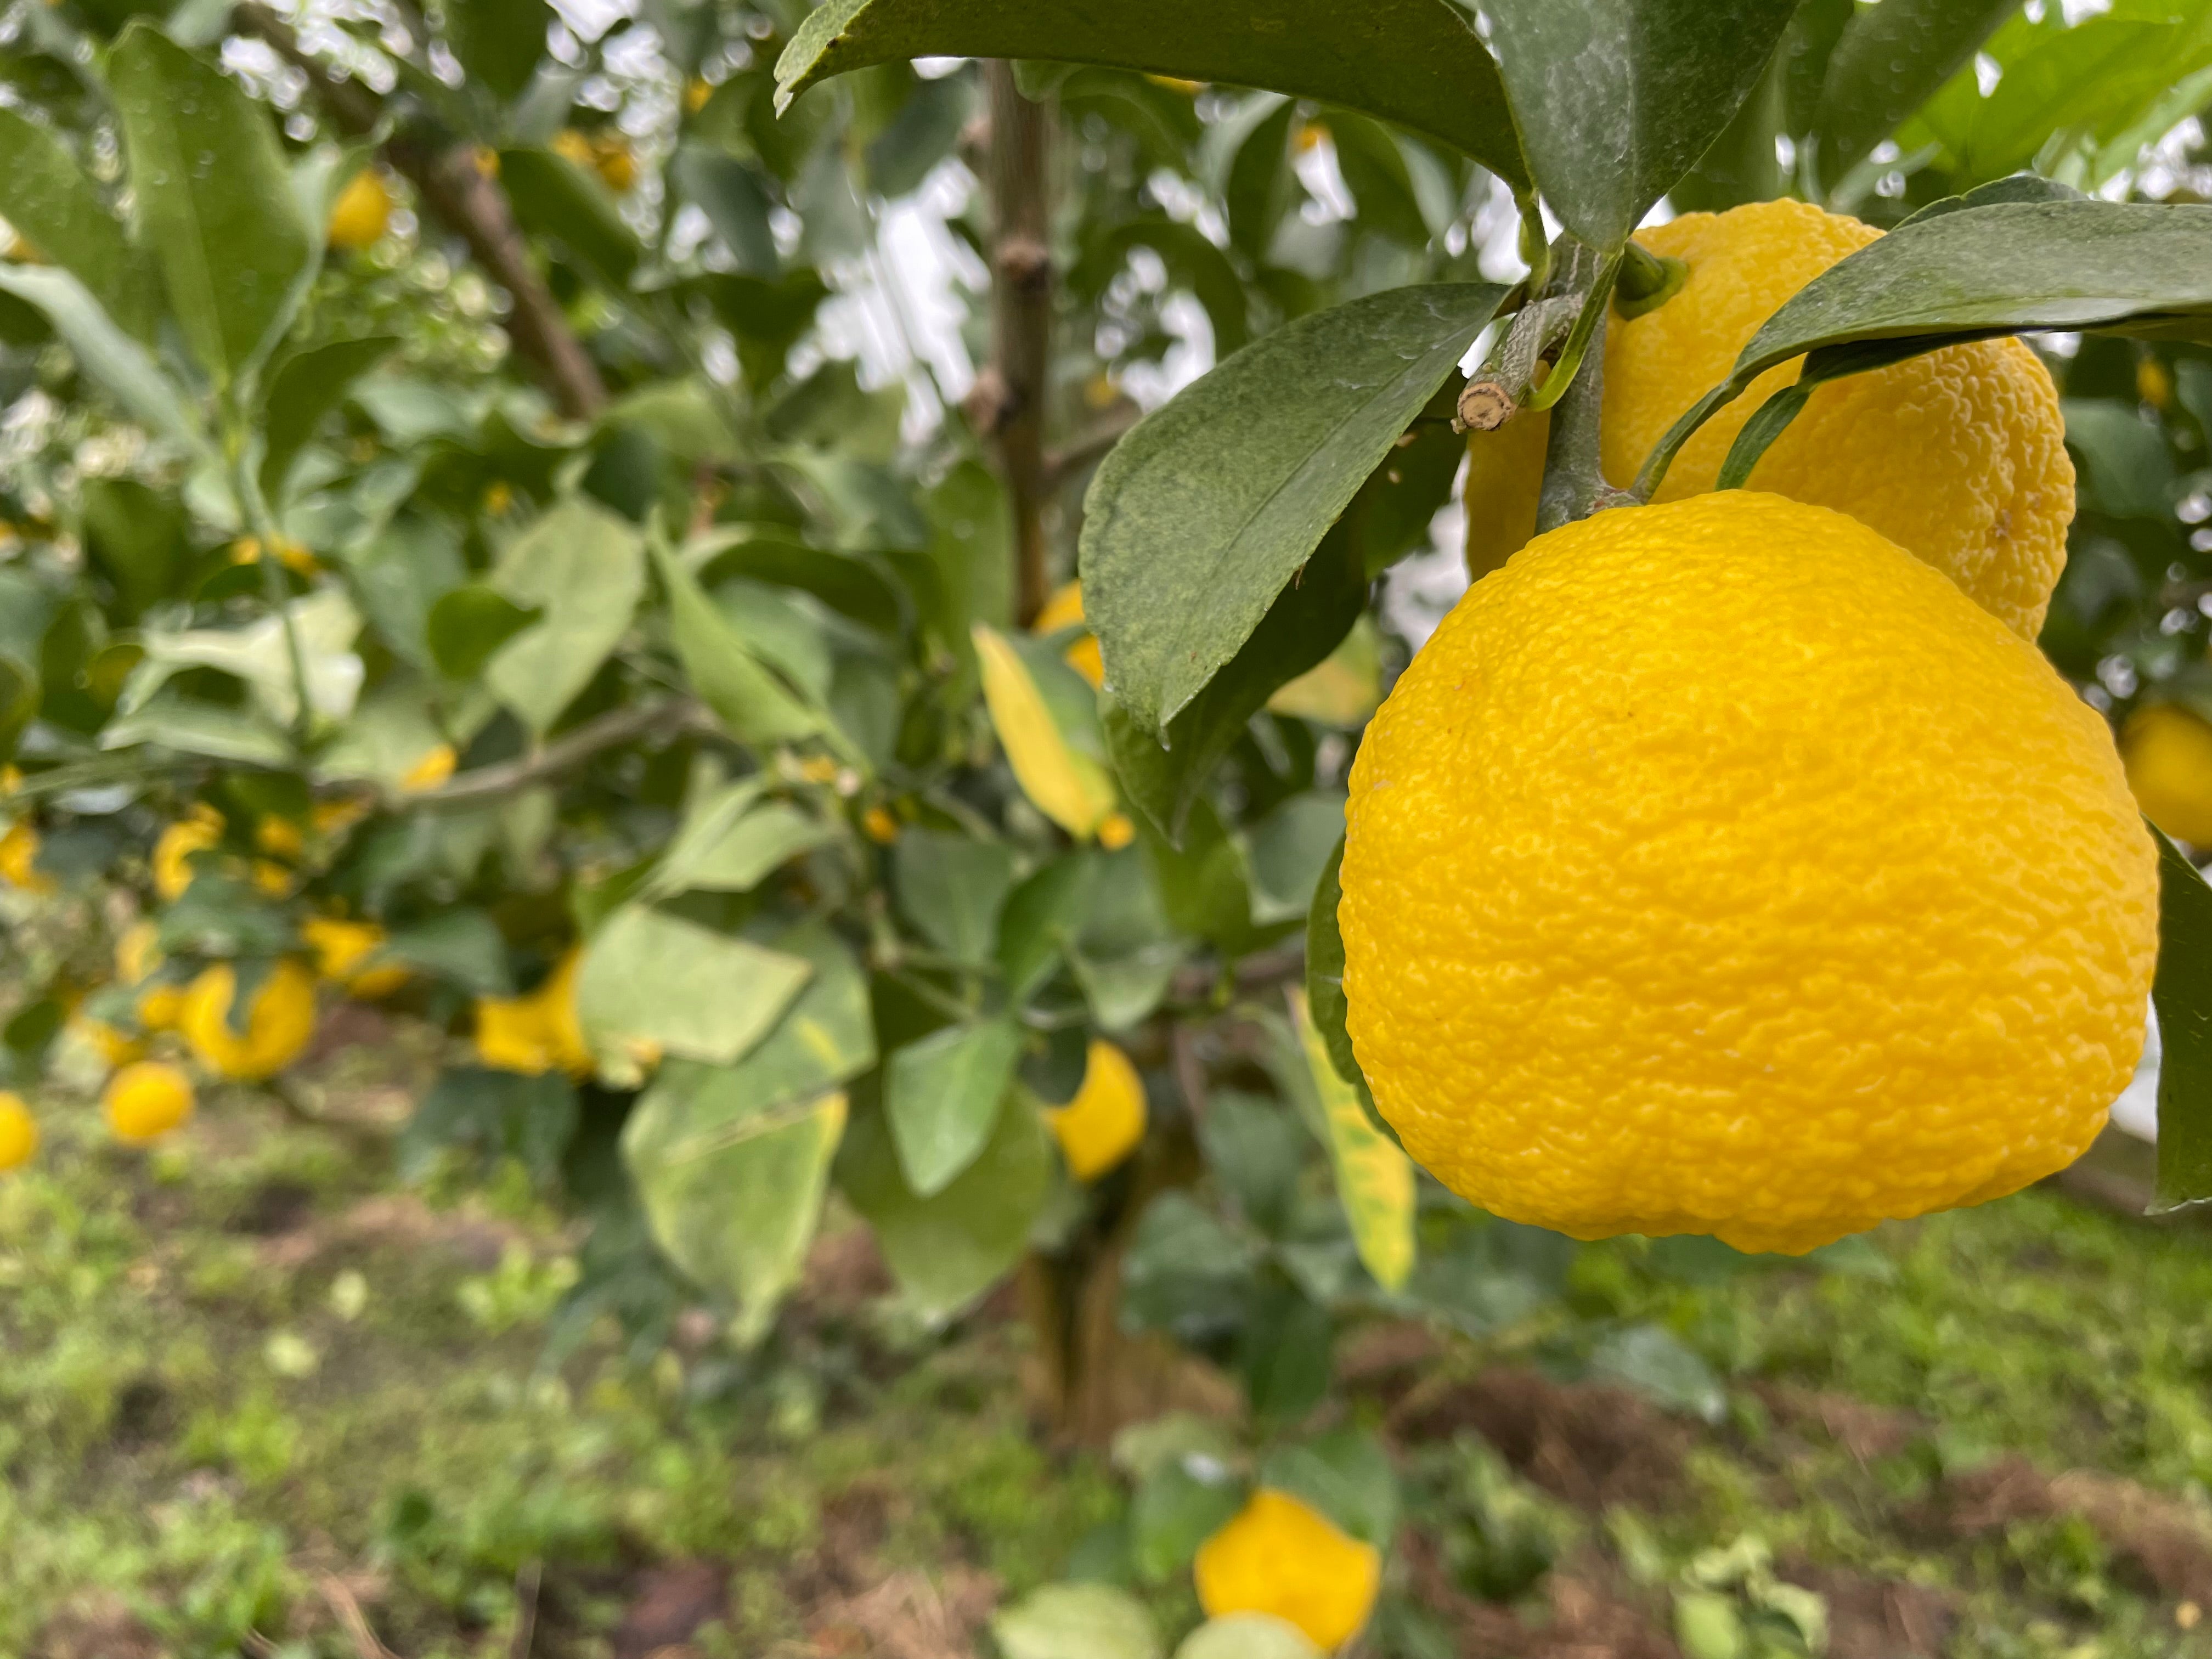 Yuzu: the citrus fruit that looks like it fell off a lorry